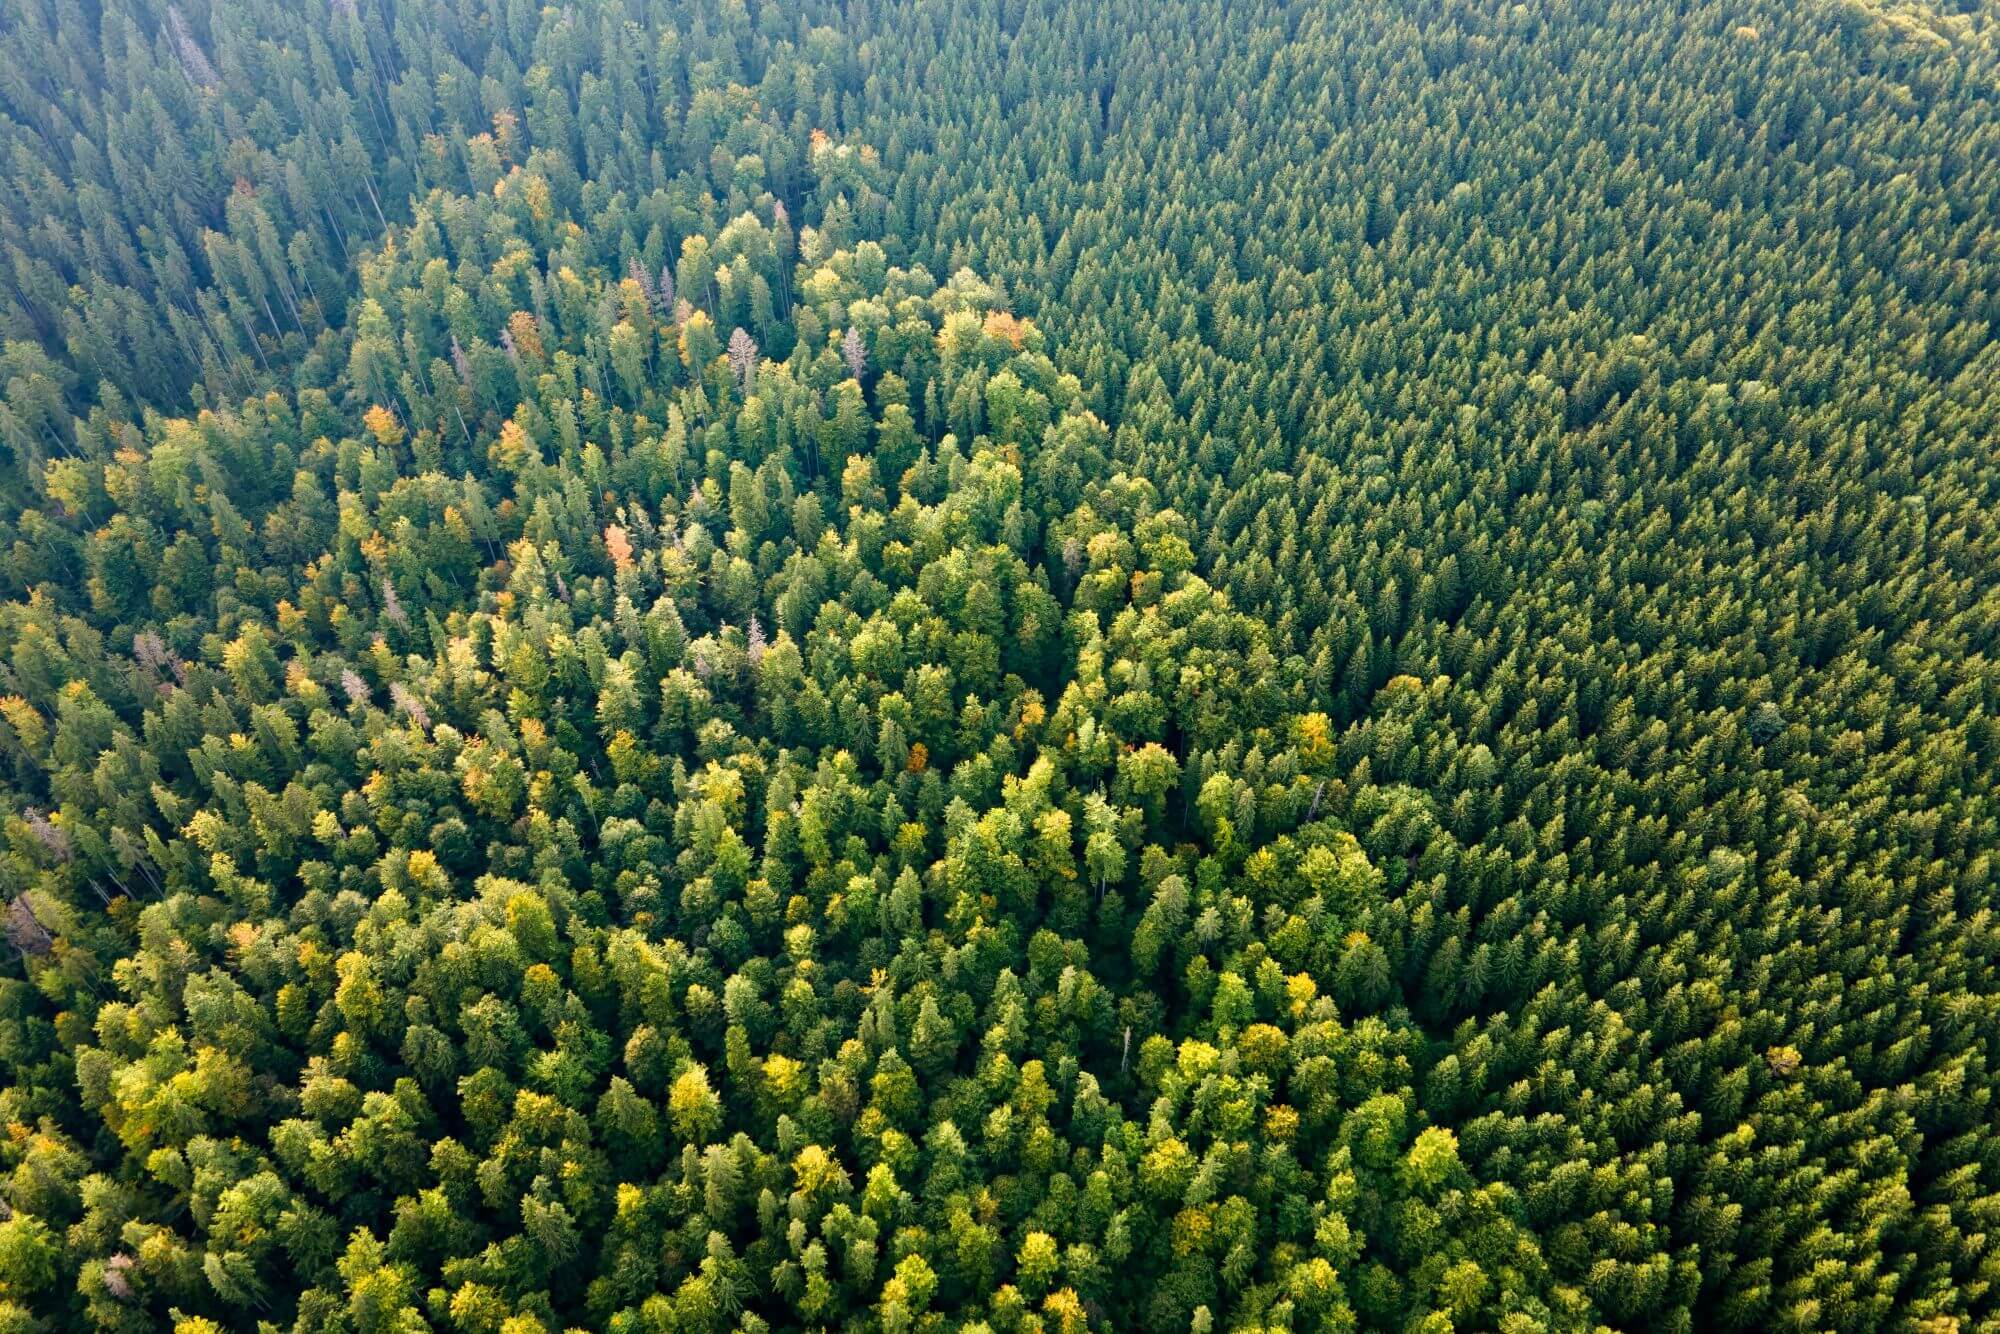 A forest of trees as seen from the air